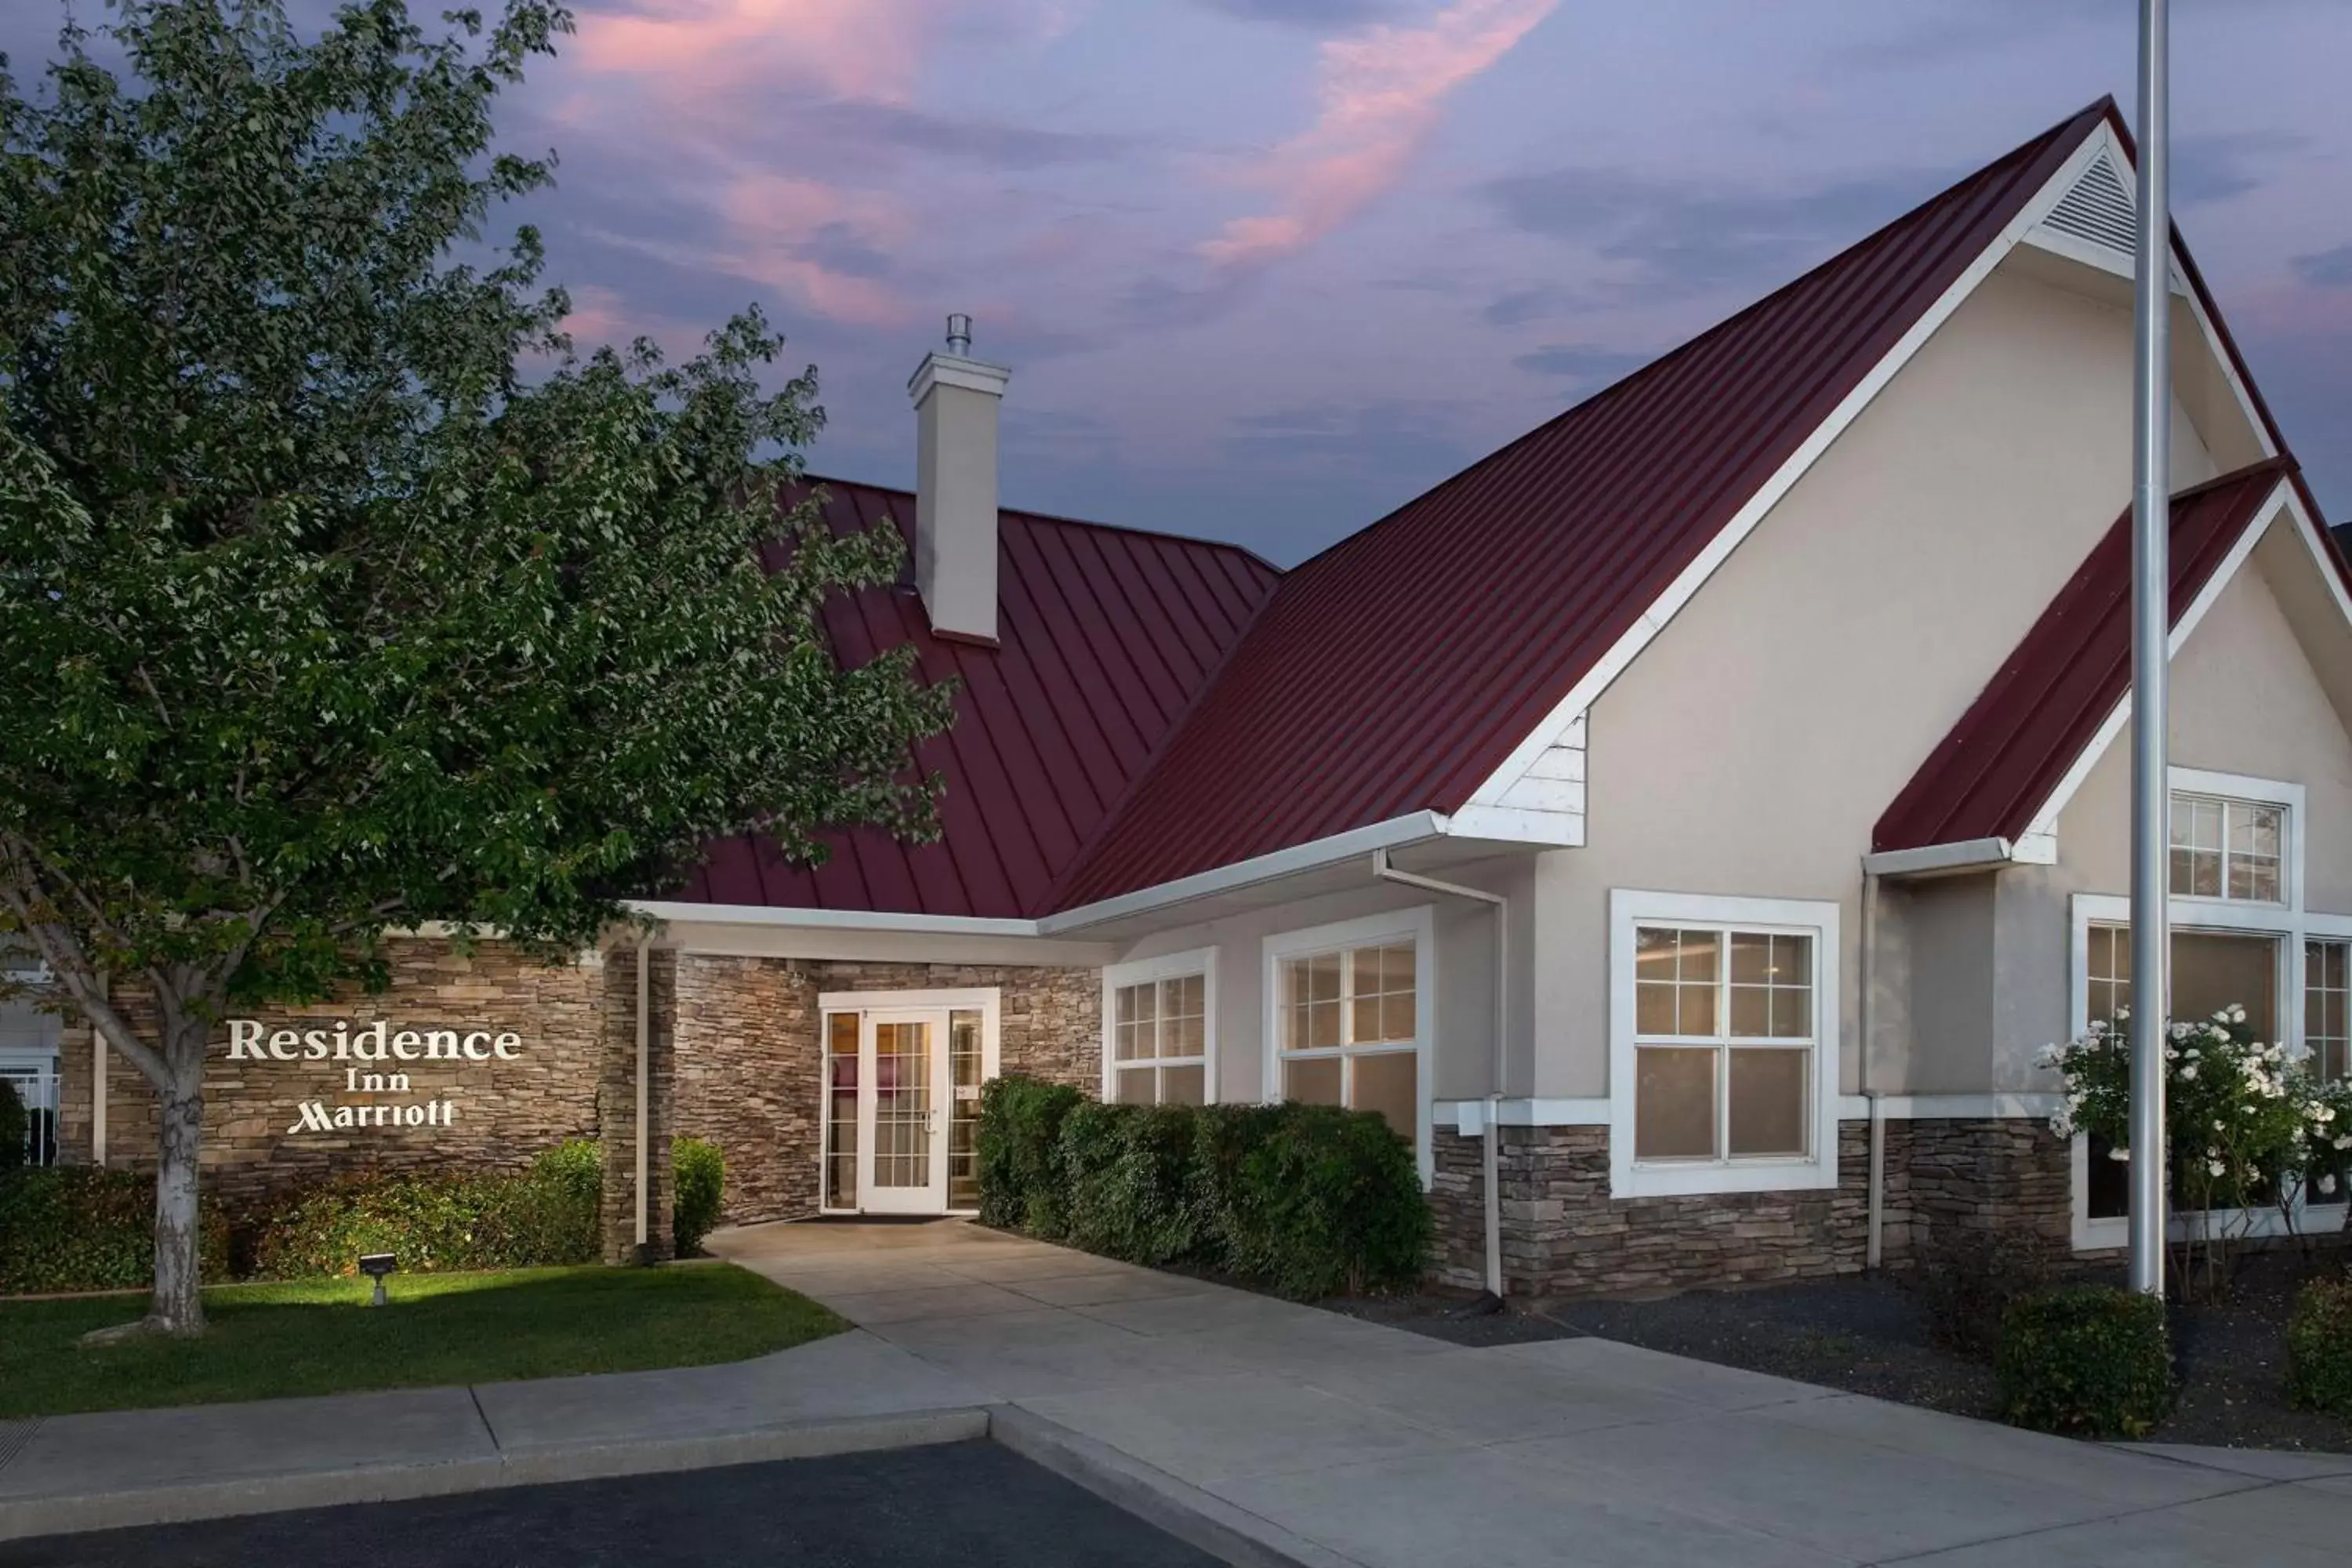 Property Building in Residence Inn Chico